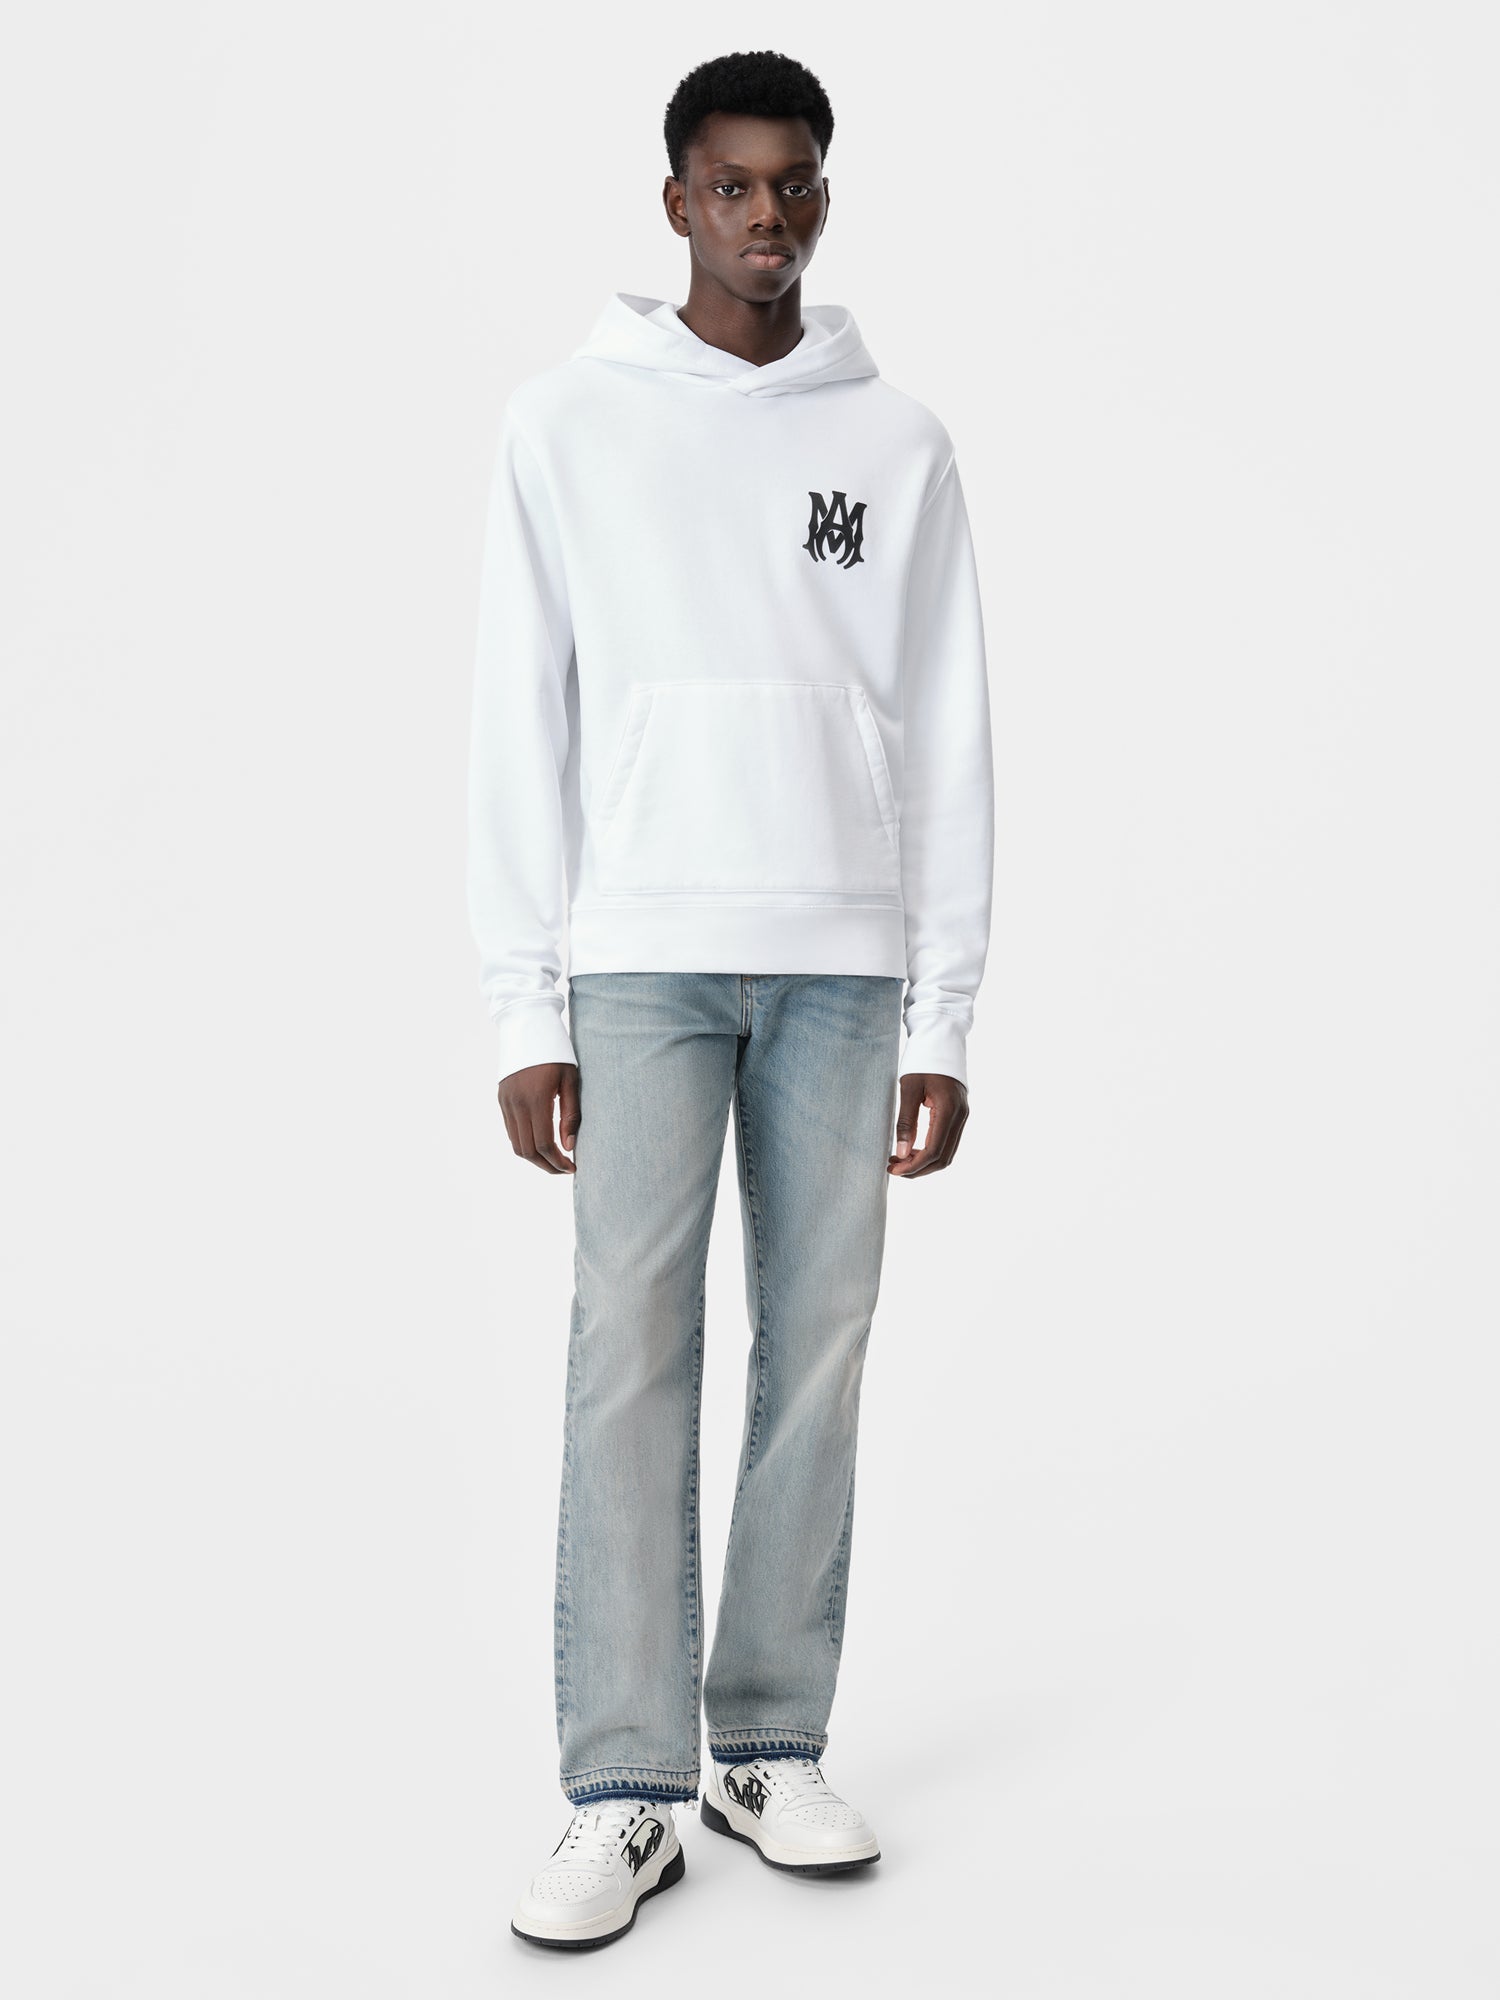 Product MA CORE LOGO HOODIE - White featured image